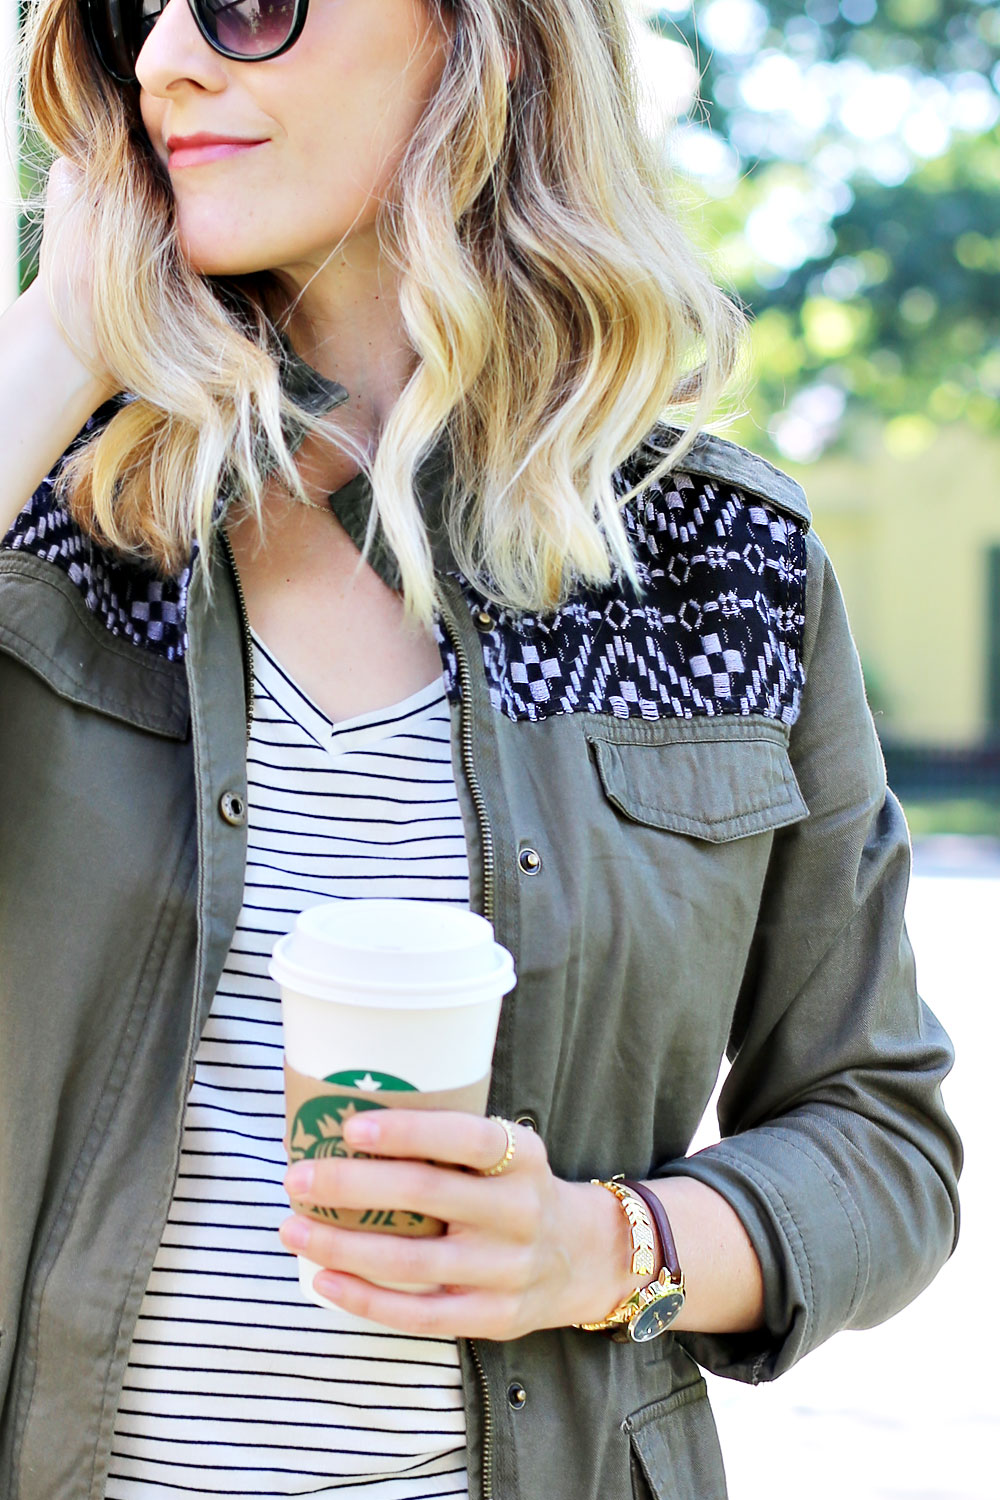 Pair a cargo jacket with a striped tee and lace-up flats for a chic back-to-school look.